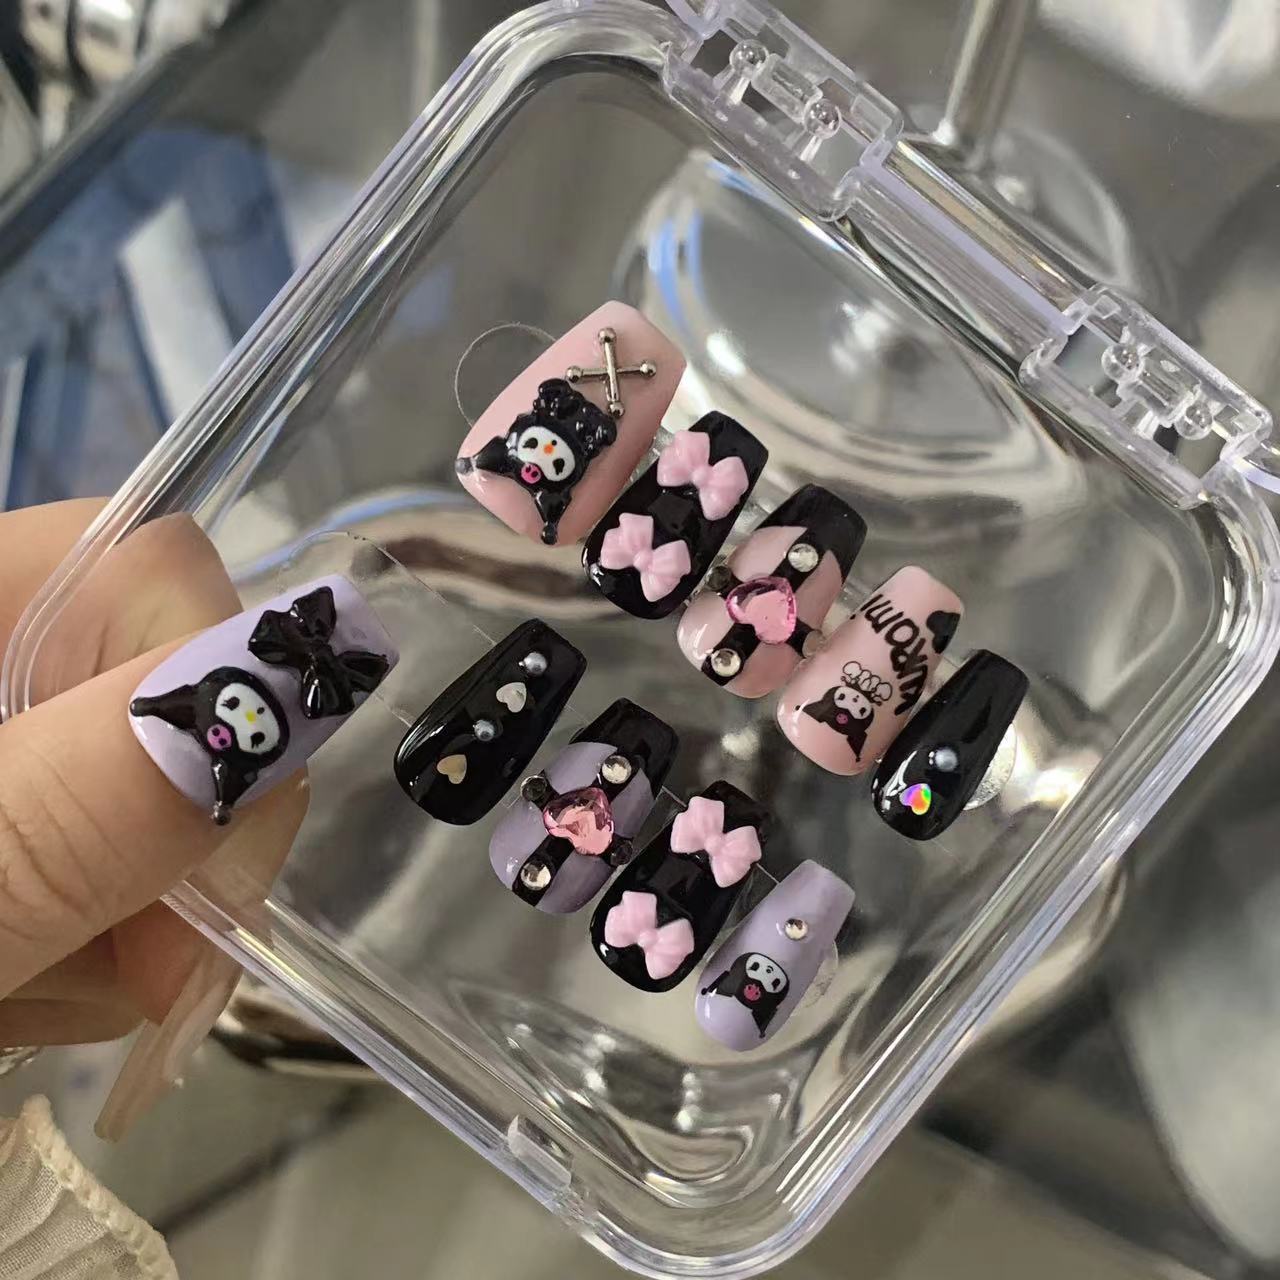 KUROMI-TEN PIECES OF HANDCRAFTED PRESS ON NAIL